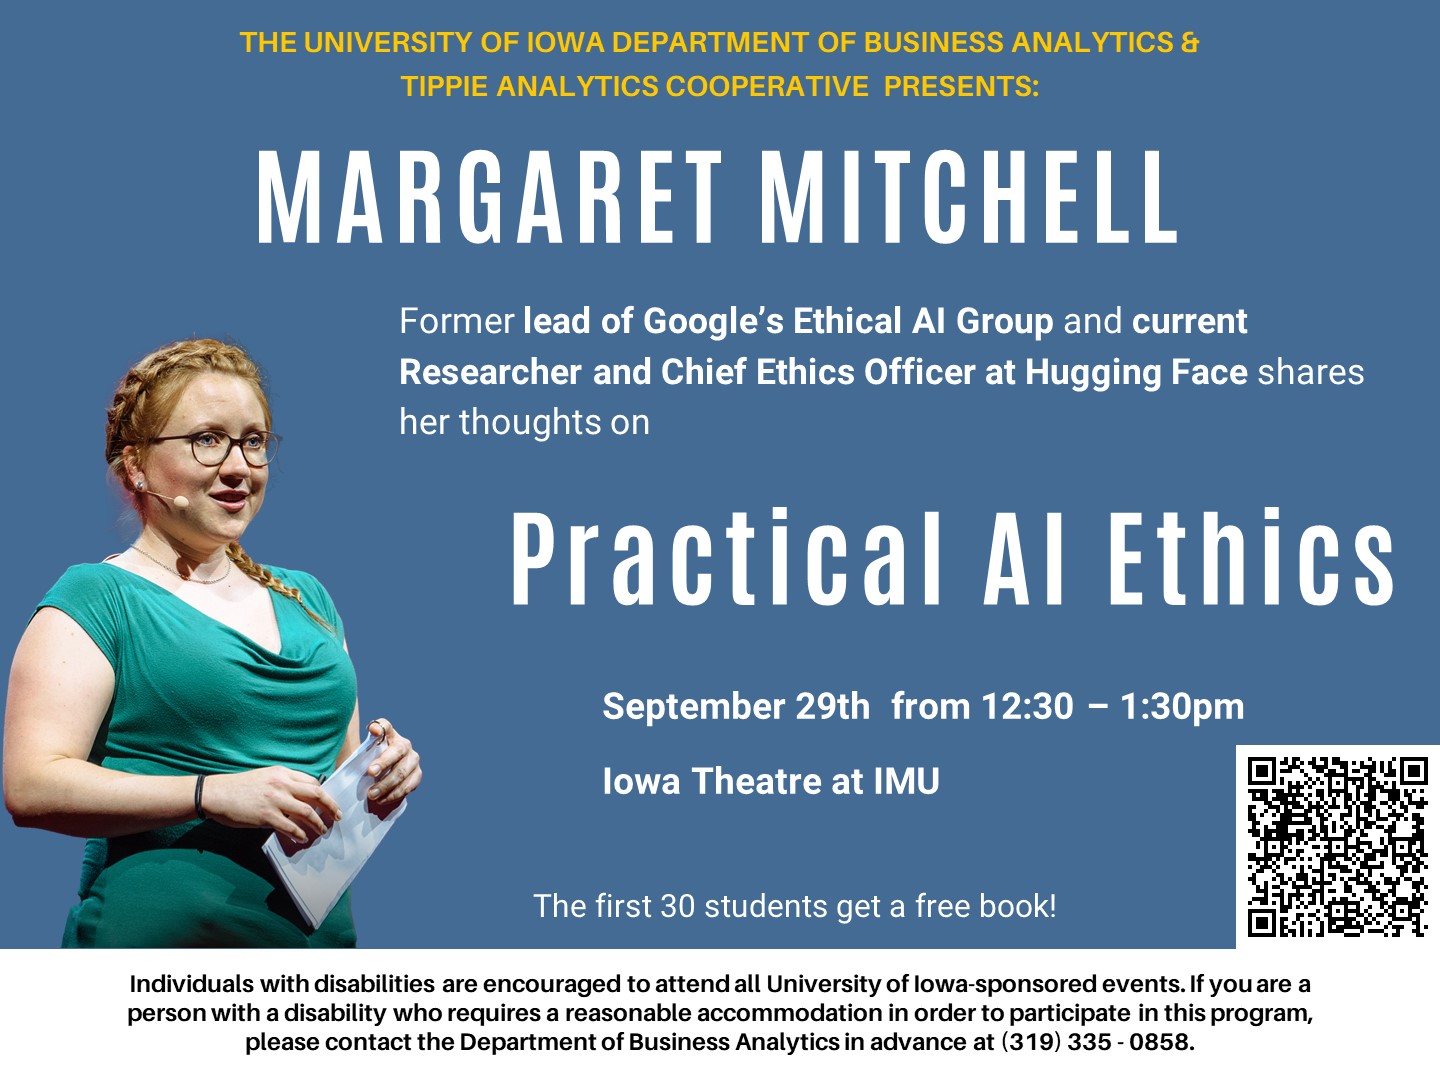 The University of Iowa Department of Business Analytics & Tippie Analytics Cooperative Present Margaret Mitchell, former lead of Google’s Ethical AI Group and current Researcher and Chief Ethics Officer at Hugging Face, speaking on Practical AI Ethics.  September 29, 12:30-1:30pm at the IMU Iowa Theatre.   The first 30 students get a free book!  Individuals with disabilities are encouraged to attend all University of Iowa-sponsored events. If you are a person with a disability who requires a reasonable accommodation in order to participate in this program, please contact the Department of Business Analytics in advance at (310) 335-0858.